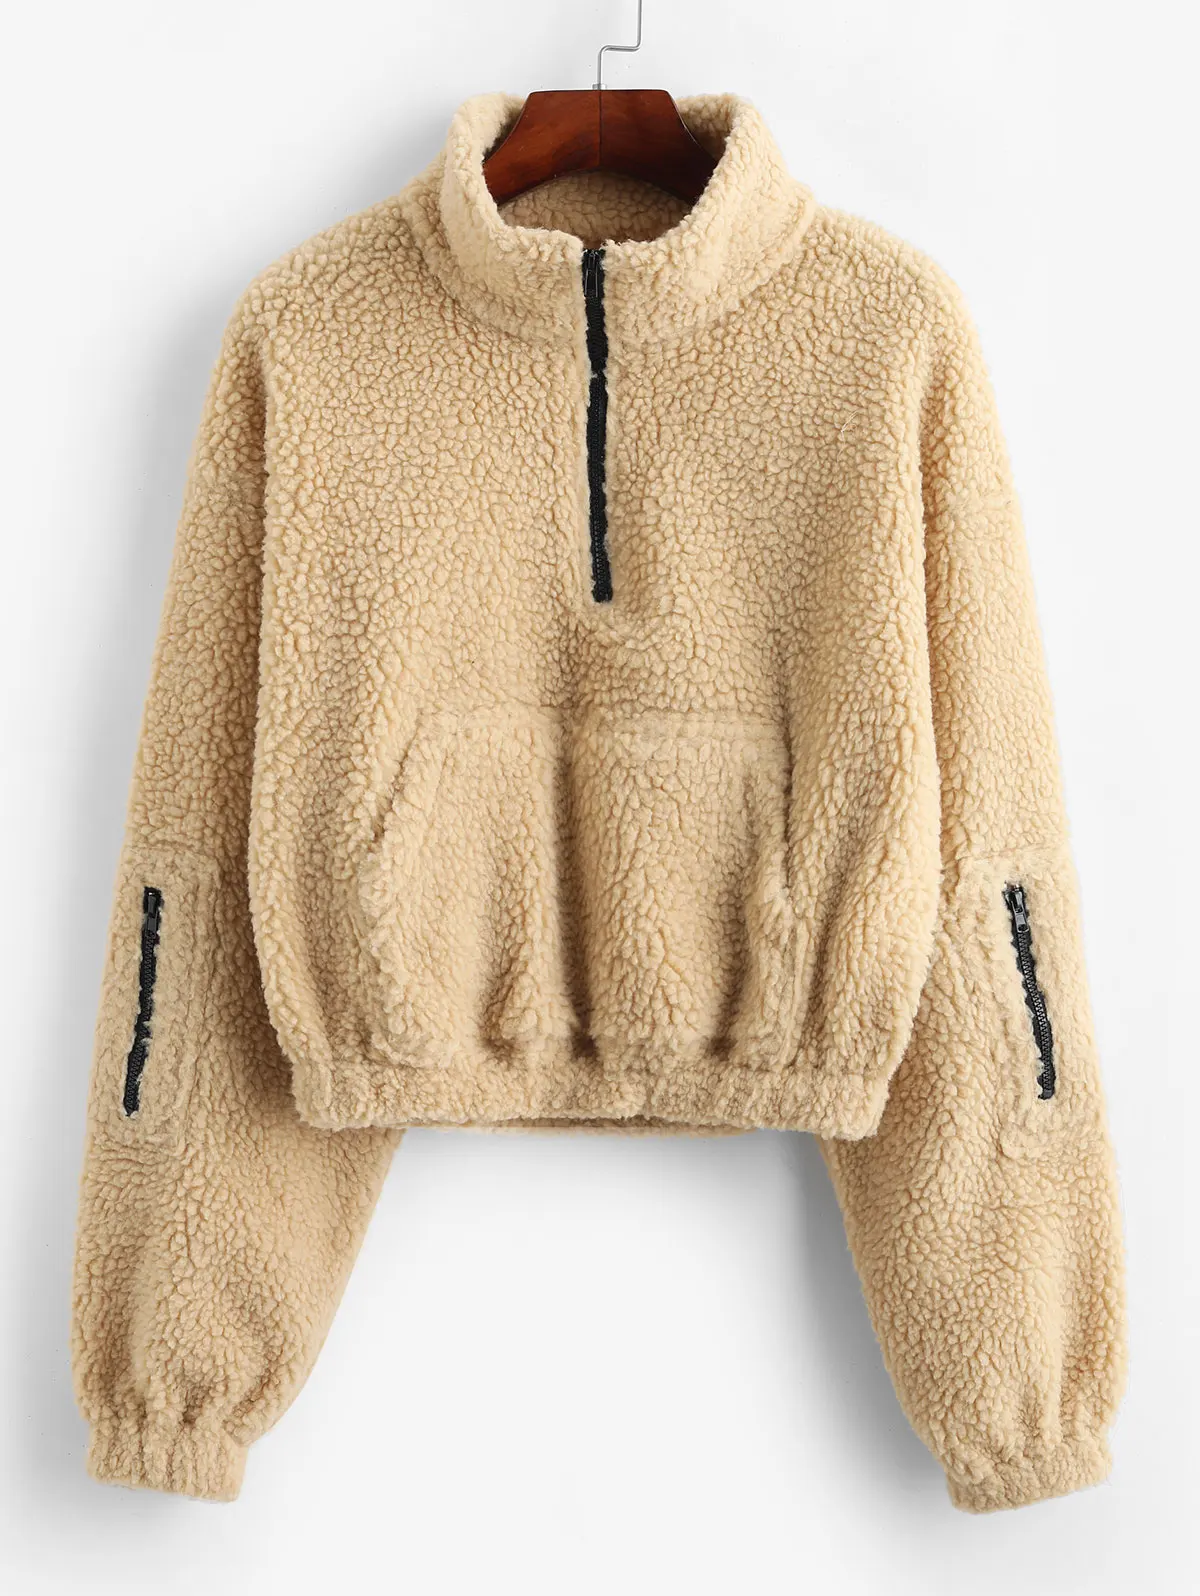  ZAFUL Front Zip High Neck Pocket Fluffy Teddy Sweatshirt Autumn Winter Full Sleeves Solid Color Wom